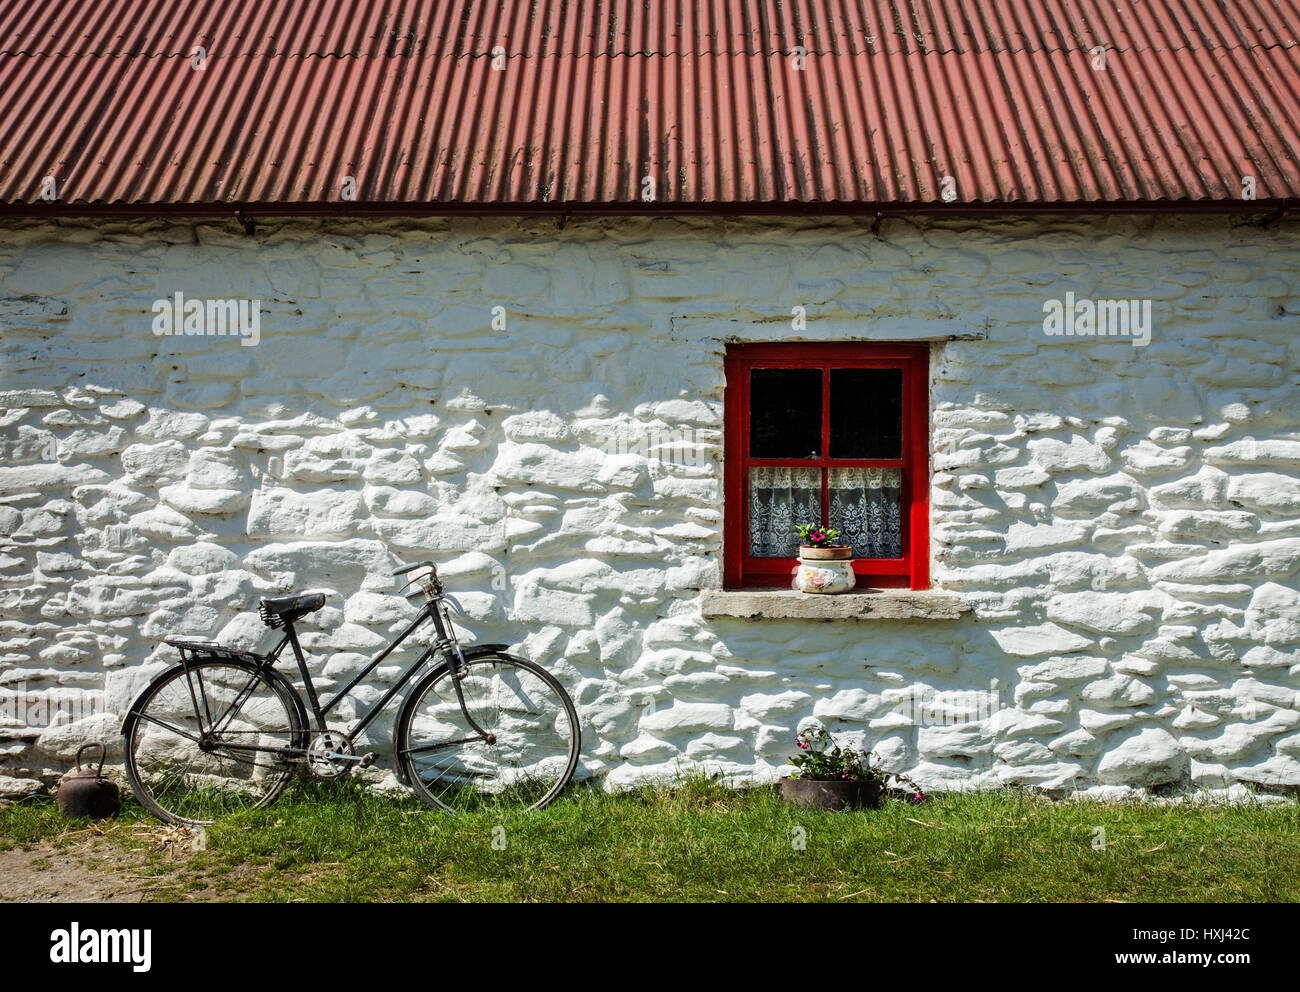 Historic site Kissane's white stone cottage Muckross House Traditional farms, farm bicycle, kitchen window, County Kerry, Ireland, FS 8.37mb. 300ppi Stock Photo